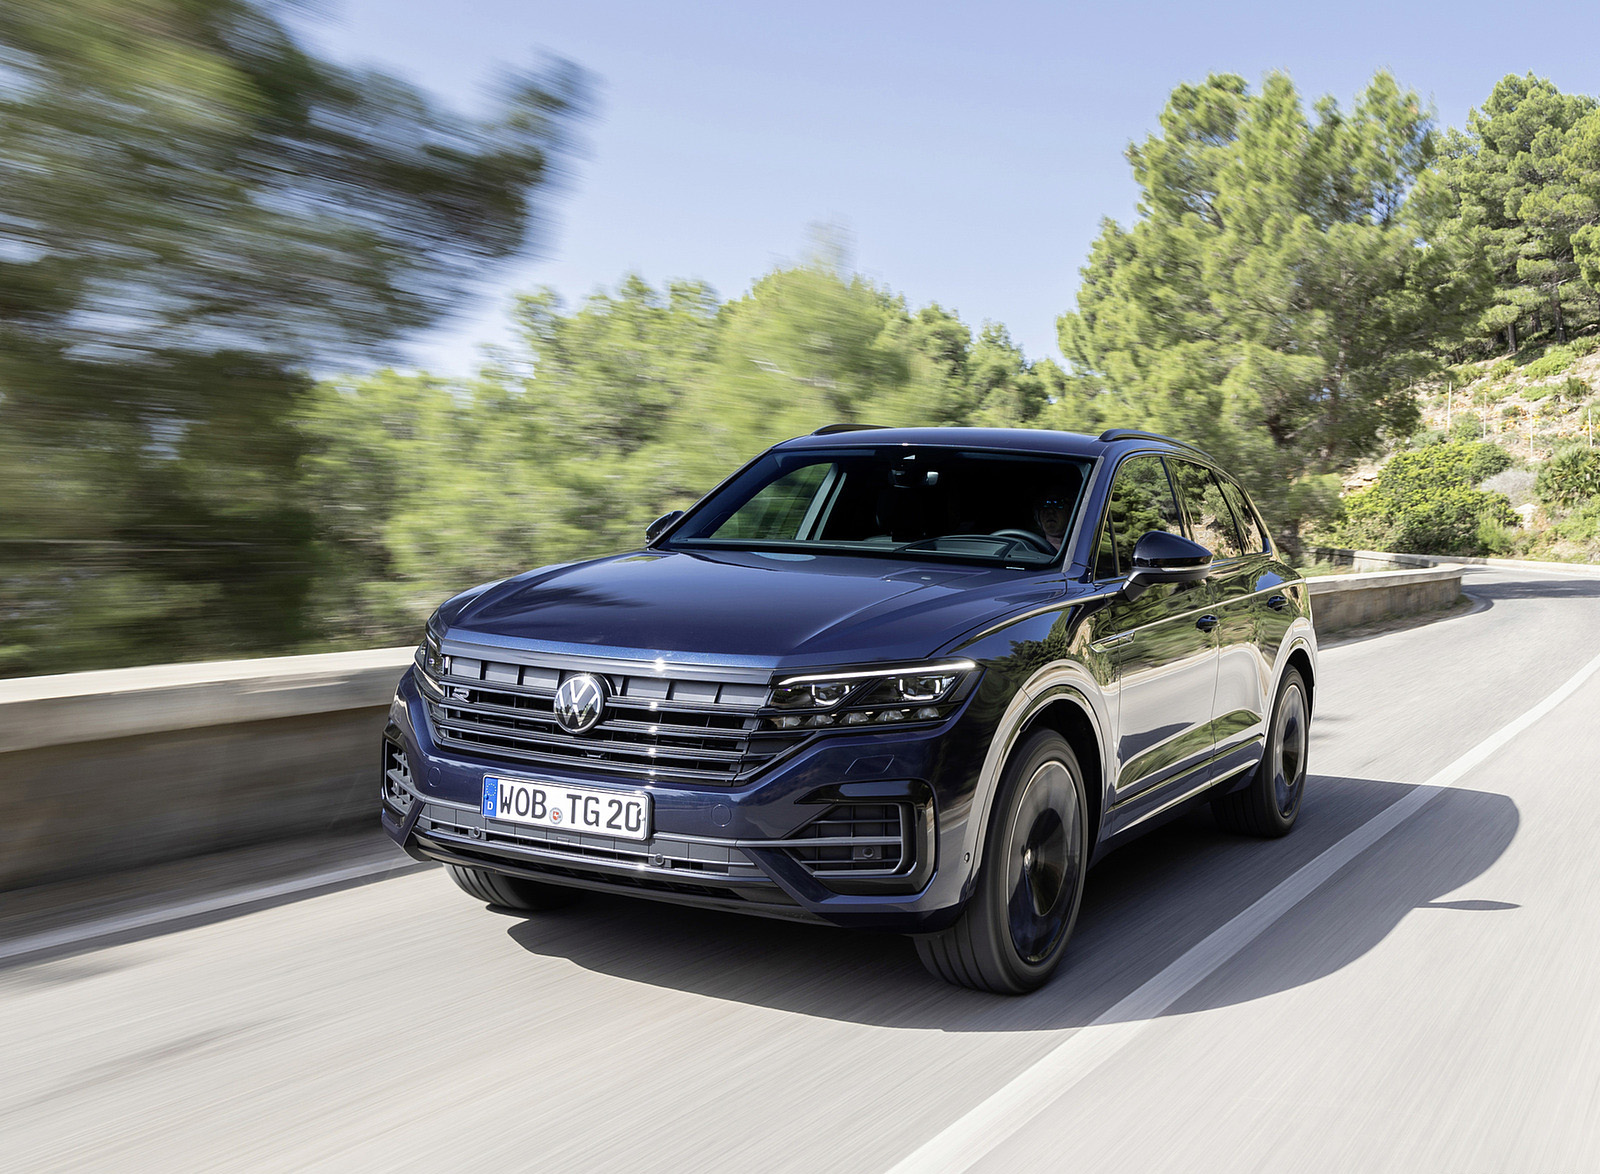 2022 Volkswagen Touareg EDITION 20 Front Three-Quarter Wallpapers (1)